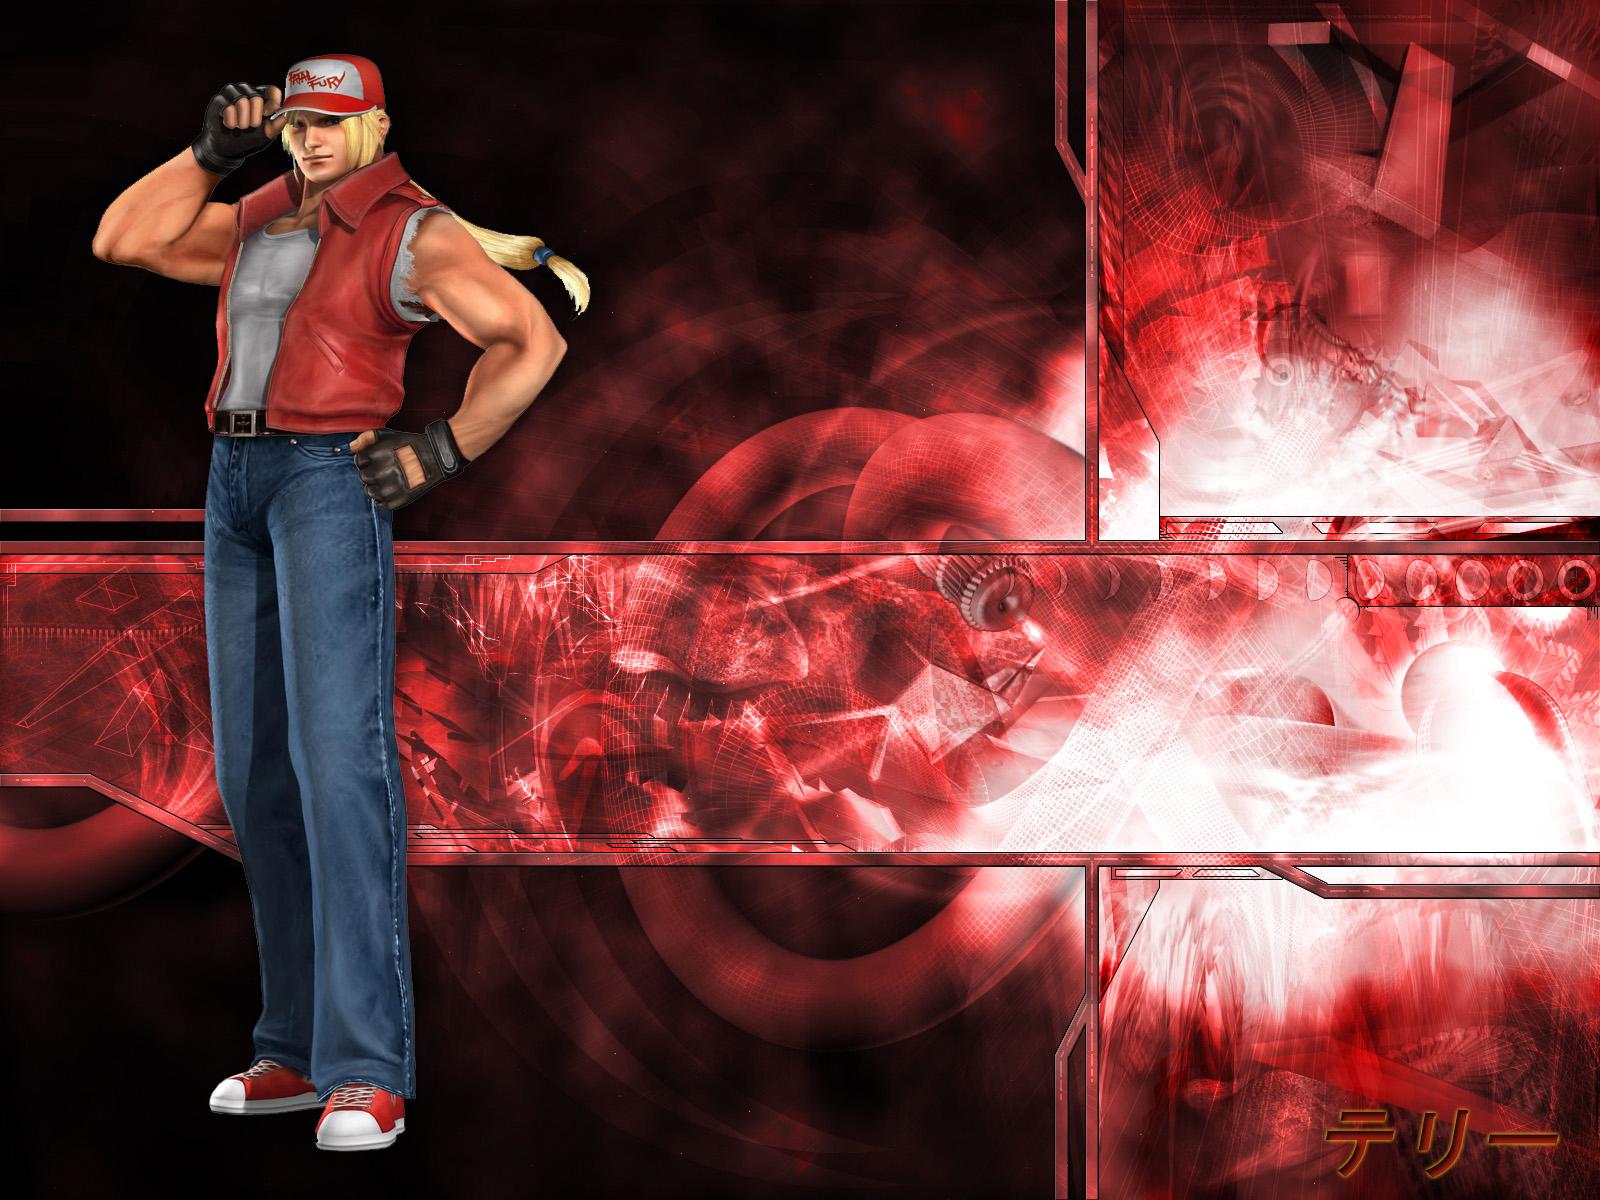 King of Fighters Wallpaper: Terry Bogard